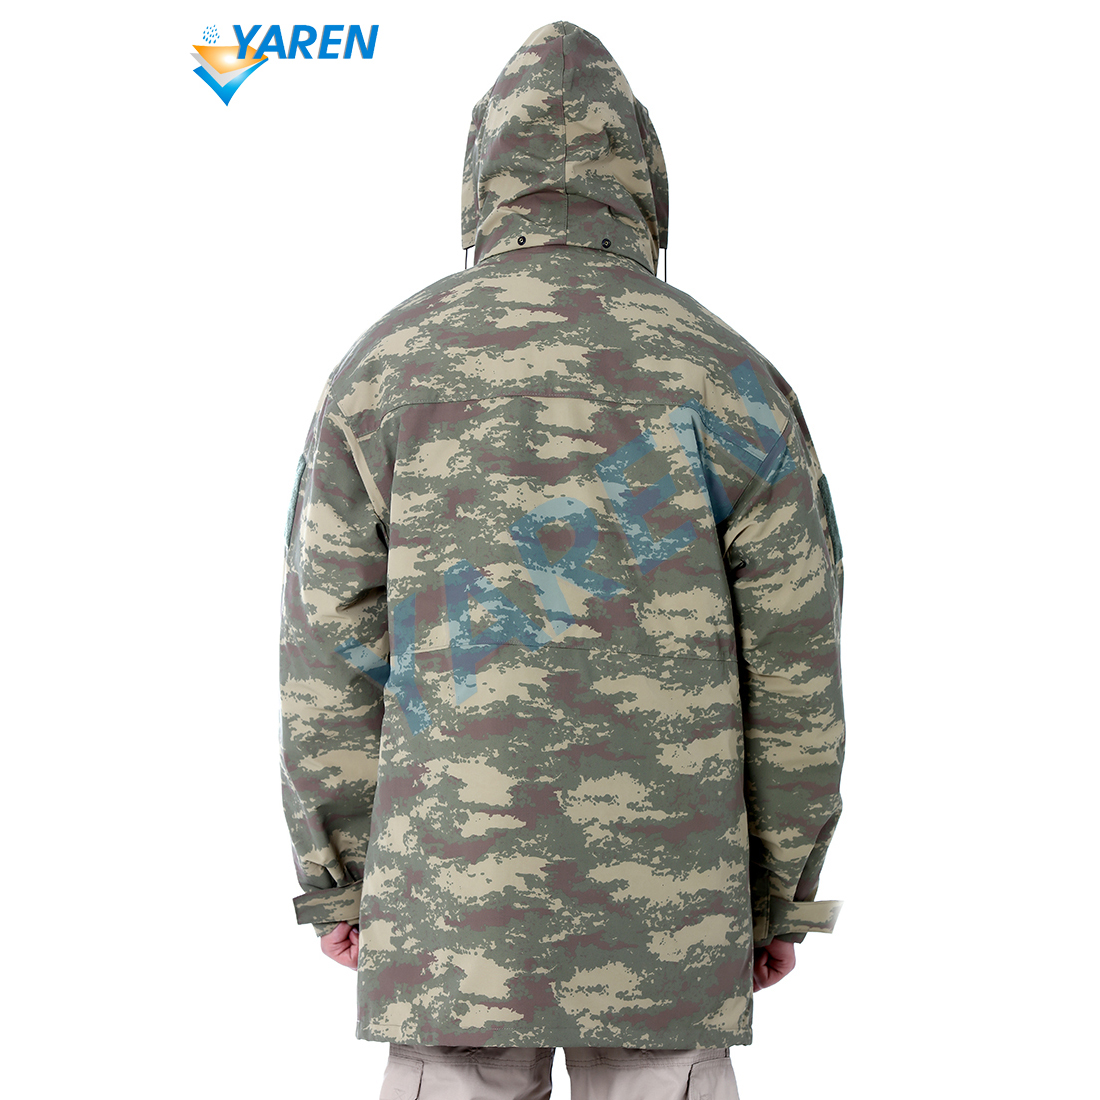 CAMOUFLAGE COAT
➡️Removable hood
➡️Made of First quality #camouflage fabrics
➡️Waterproof
➡️Digital & transfer camouflage print.
We welcome your valuable order. #YARENUNIFORM #camo #camouflagecoat #wintercoat